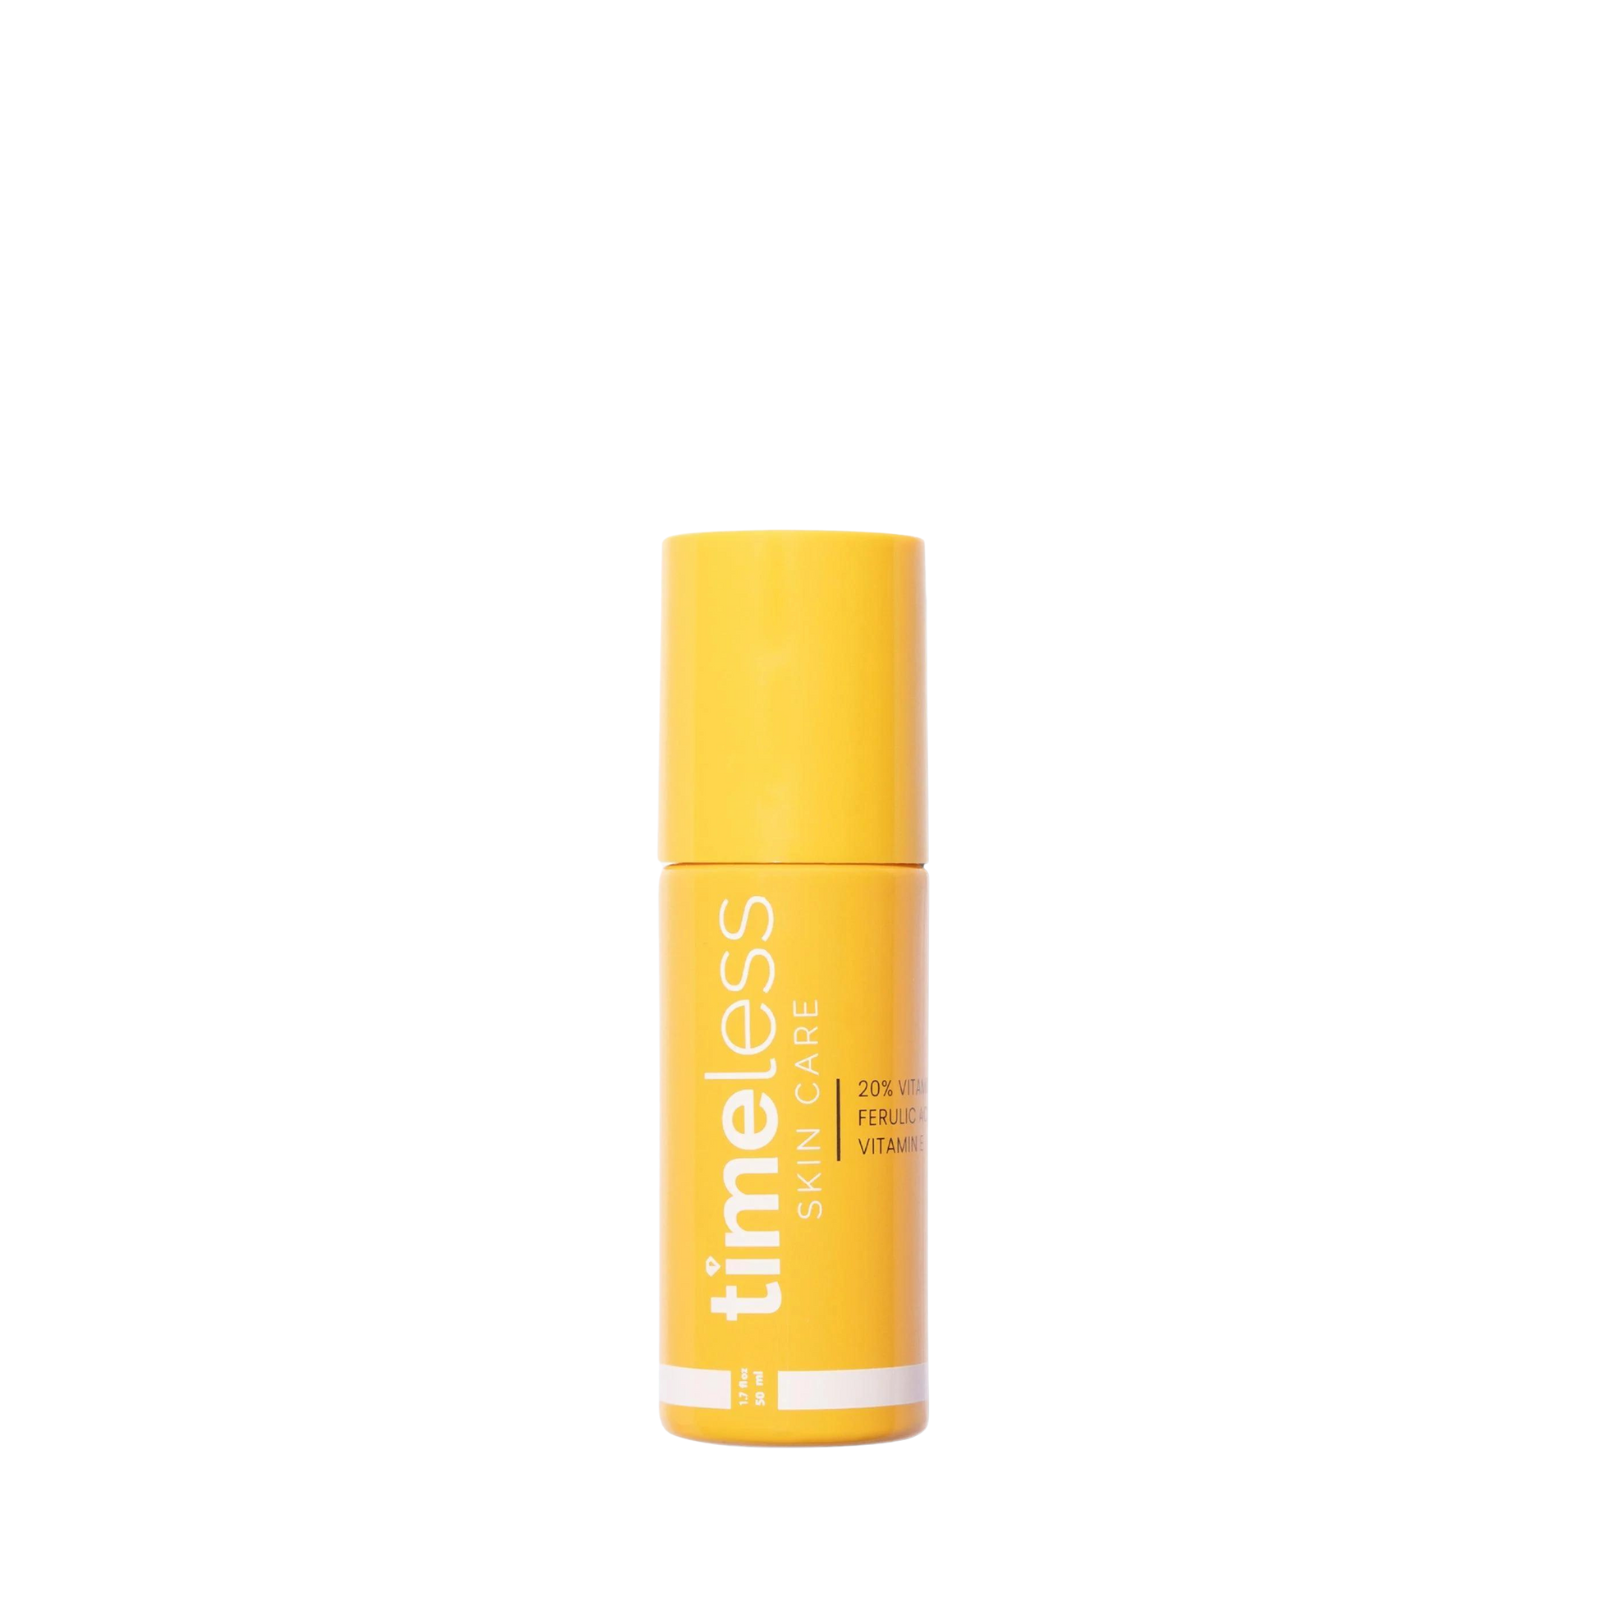 Concentrated serum with 20% of vitamin C by Timeless (Timeless 20% Vitamin C + E Ferulic Acid Serum)